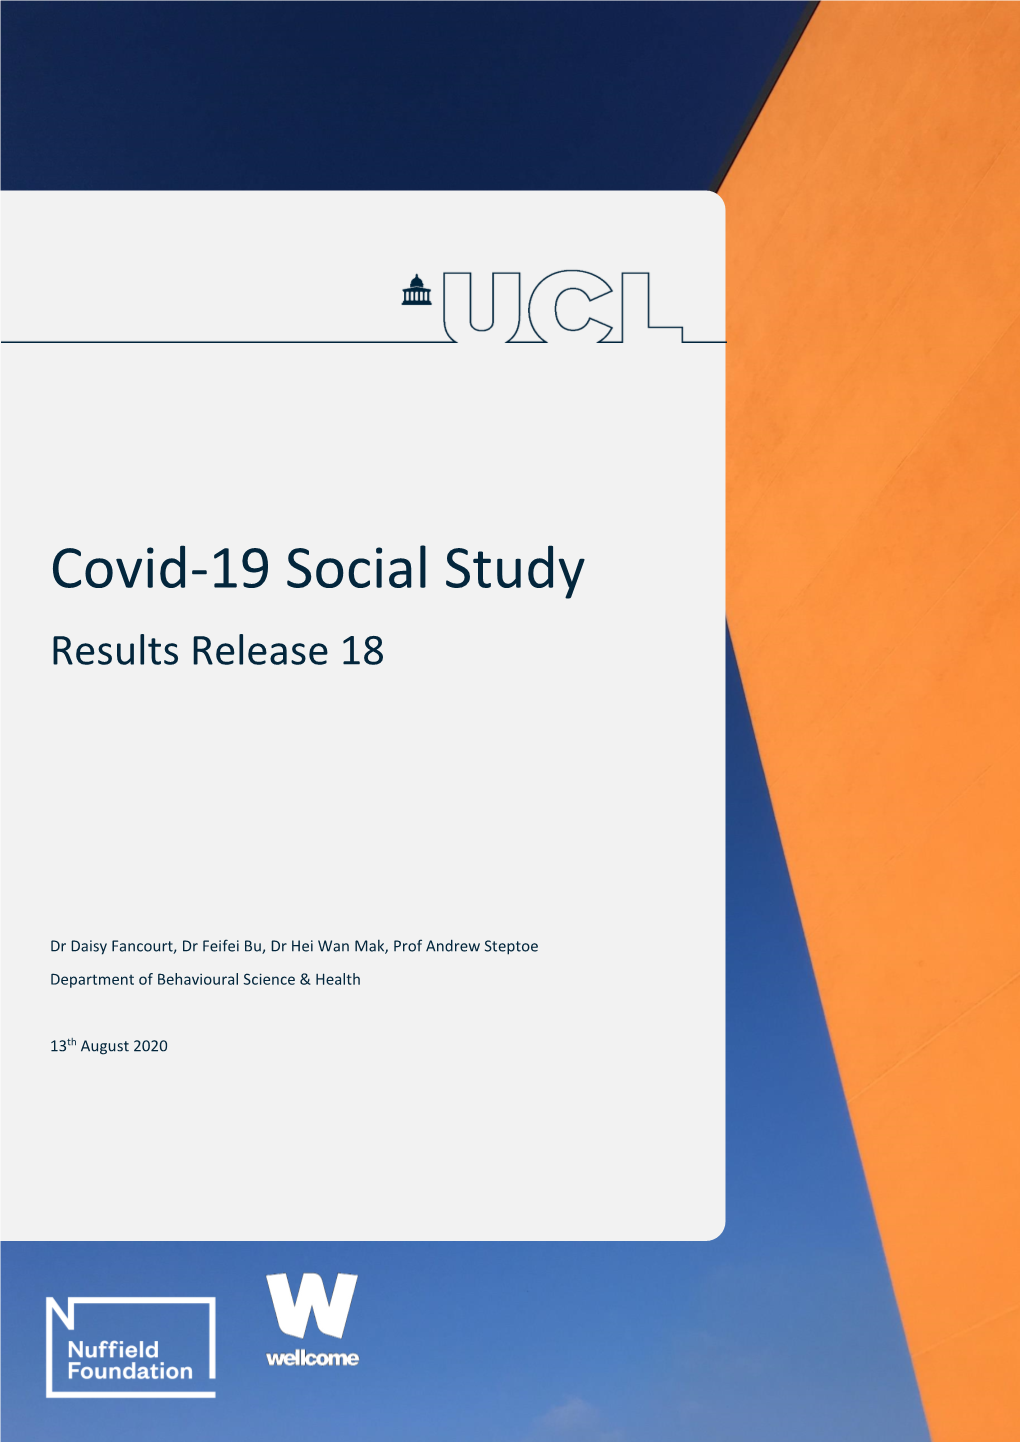 Covid-19 Social Study Results Release 18